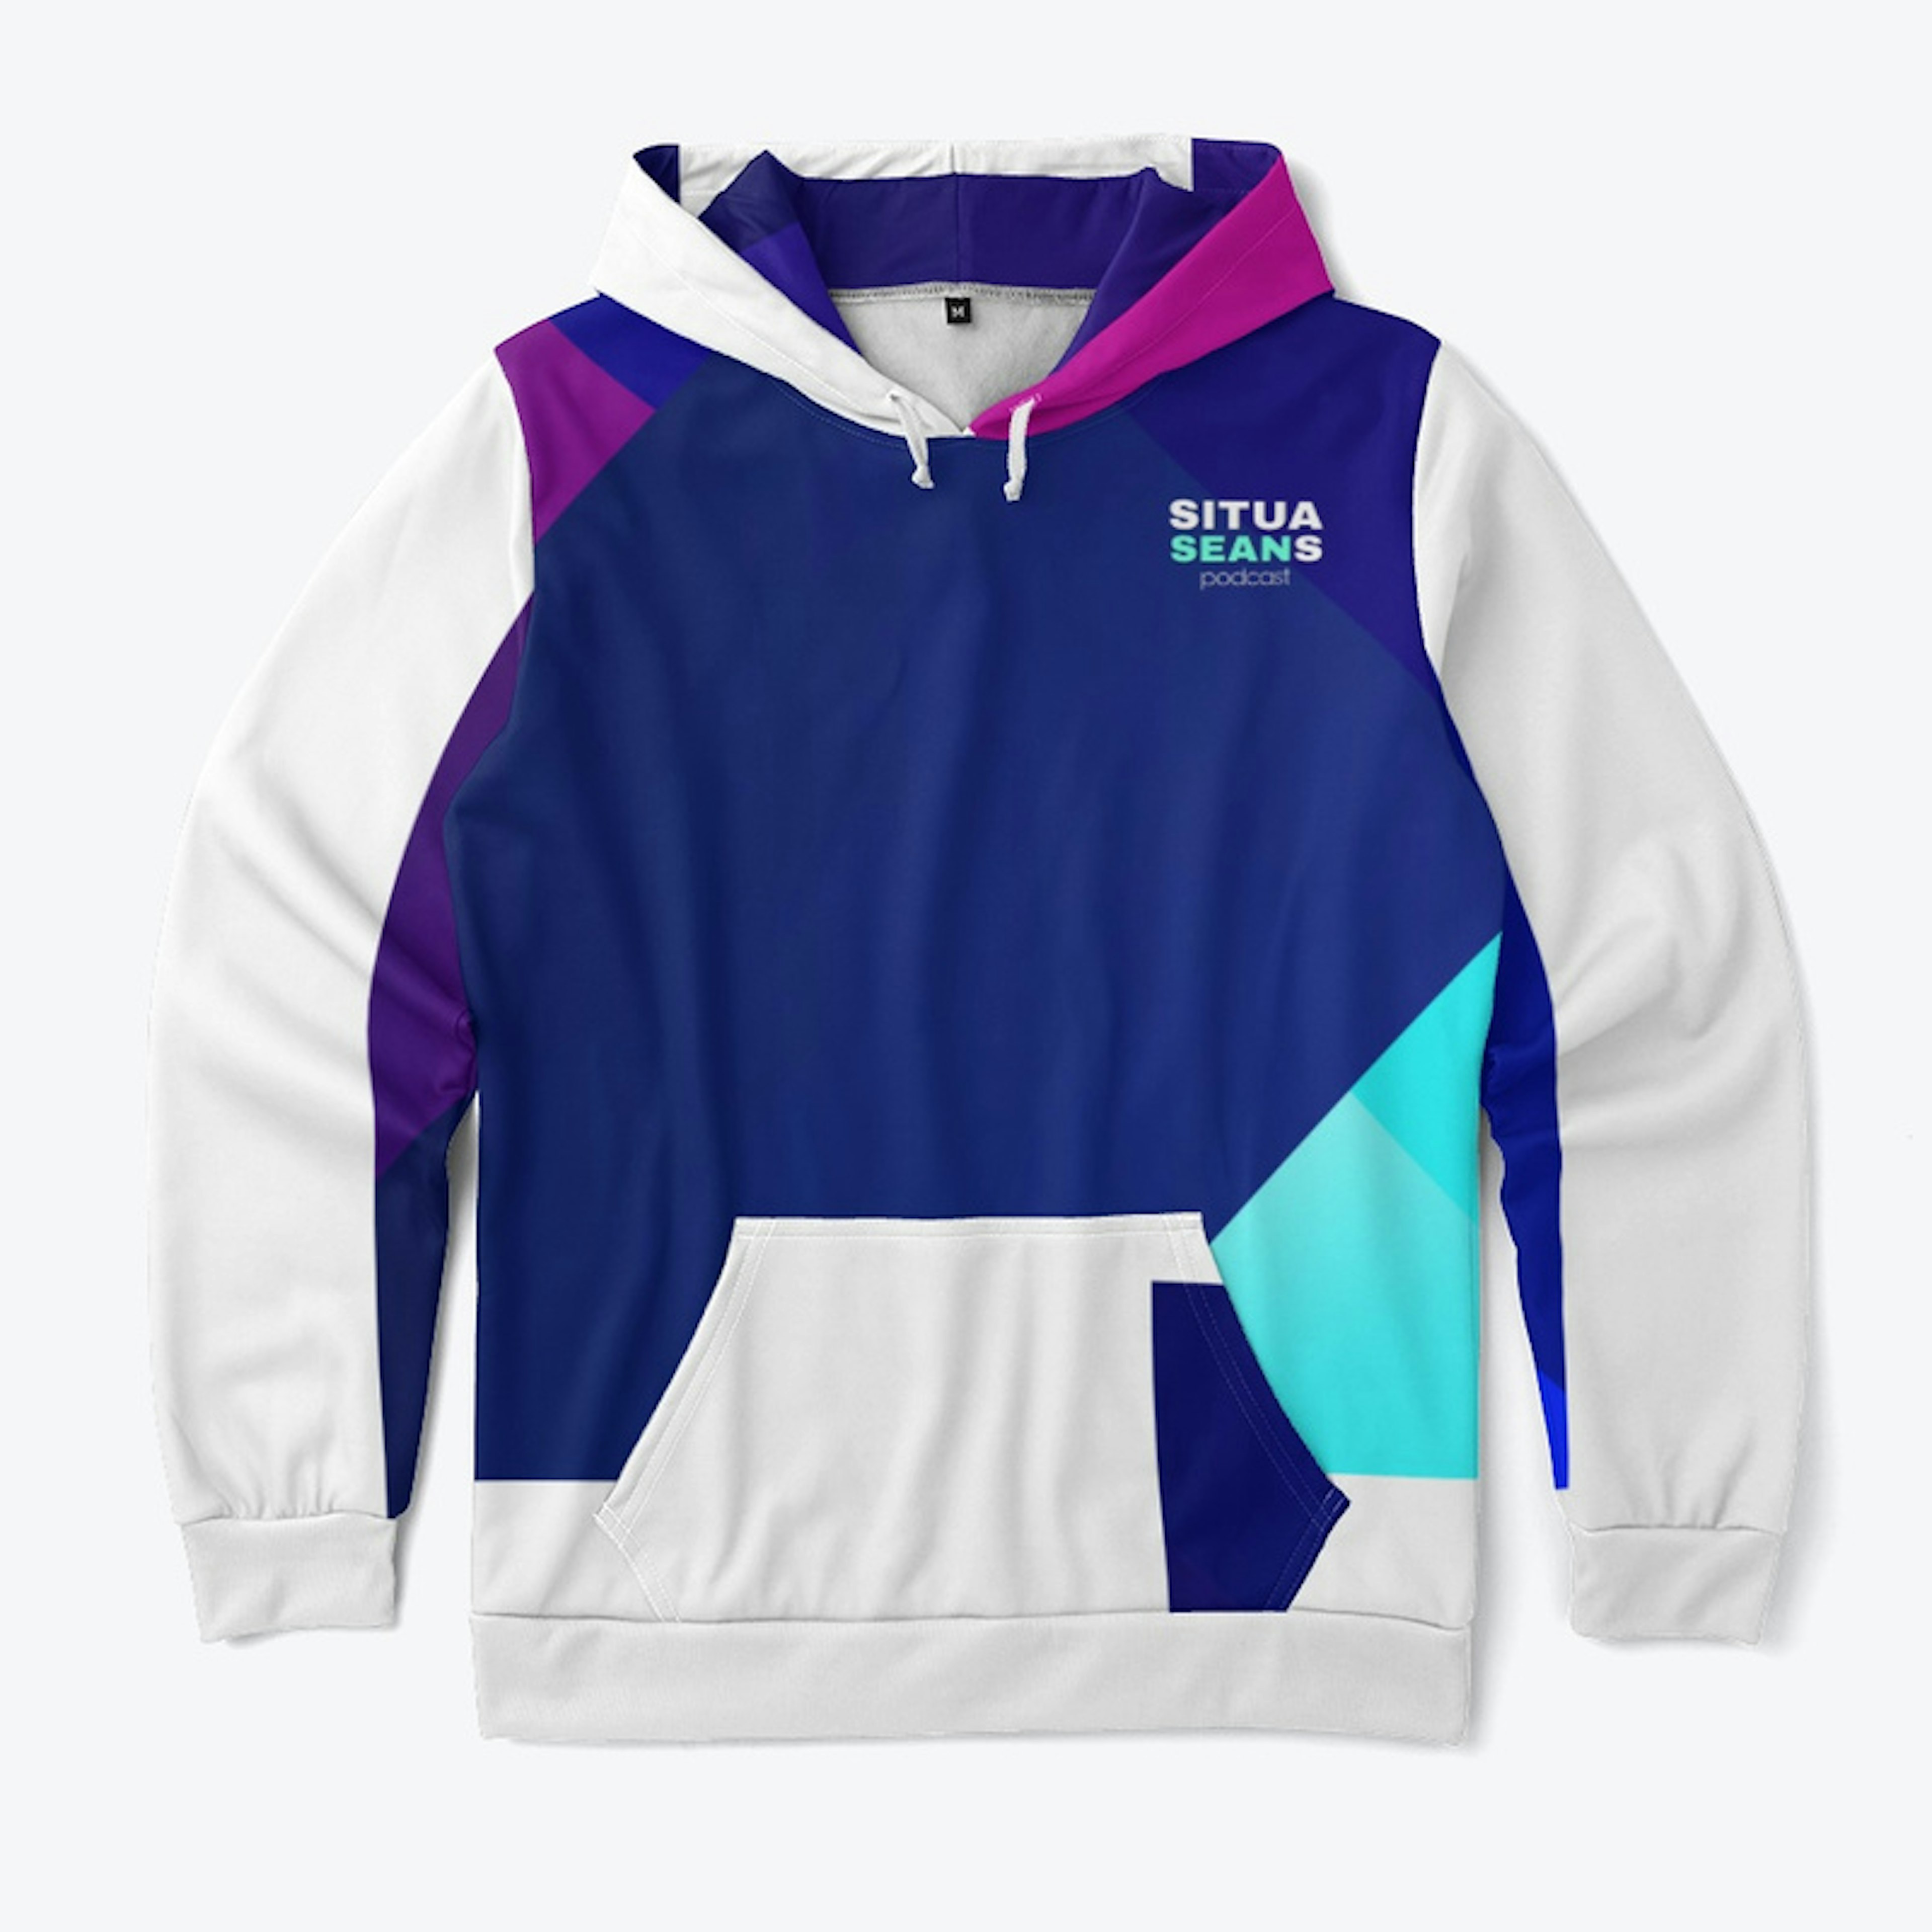 Situaseans Podcast Multicolor Hoodie